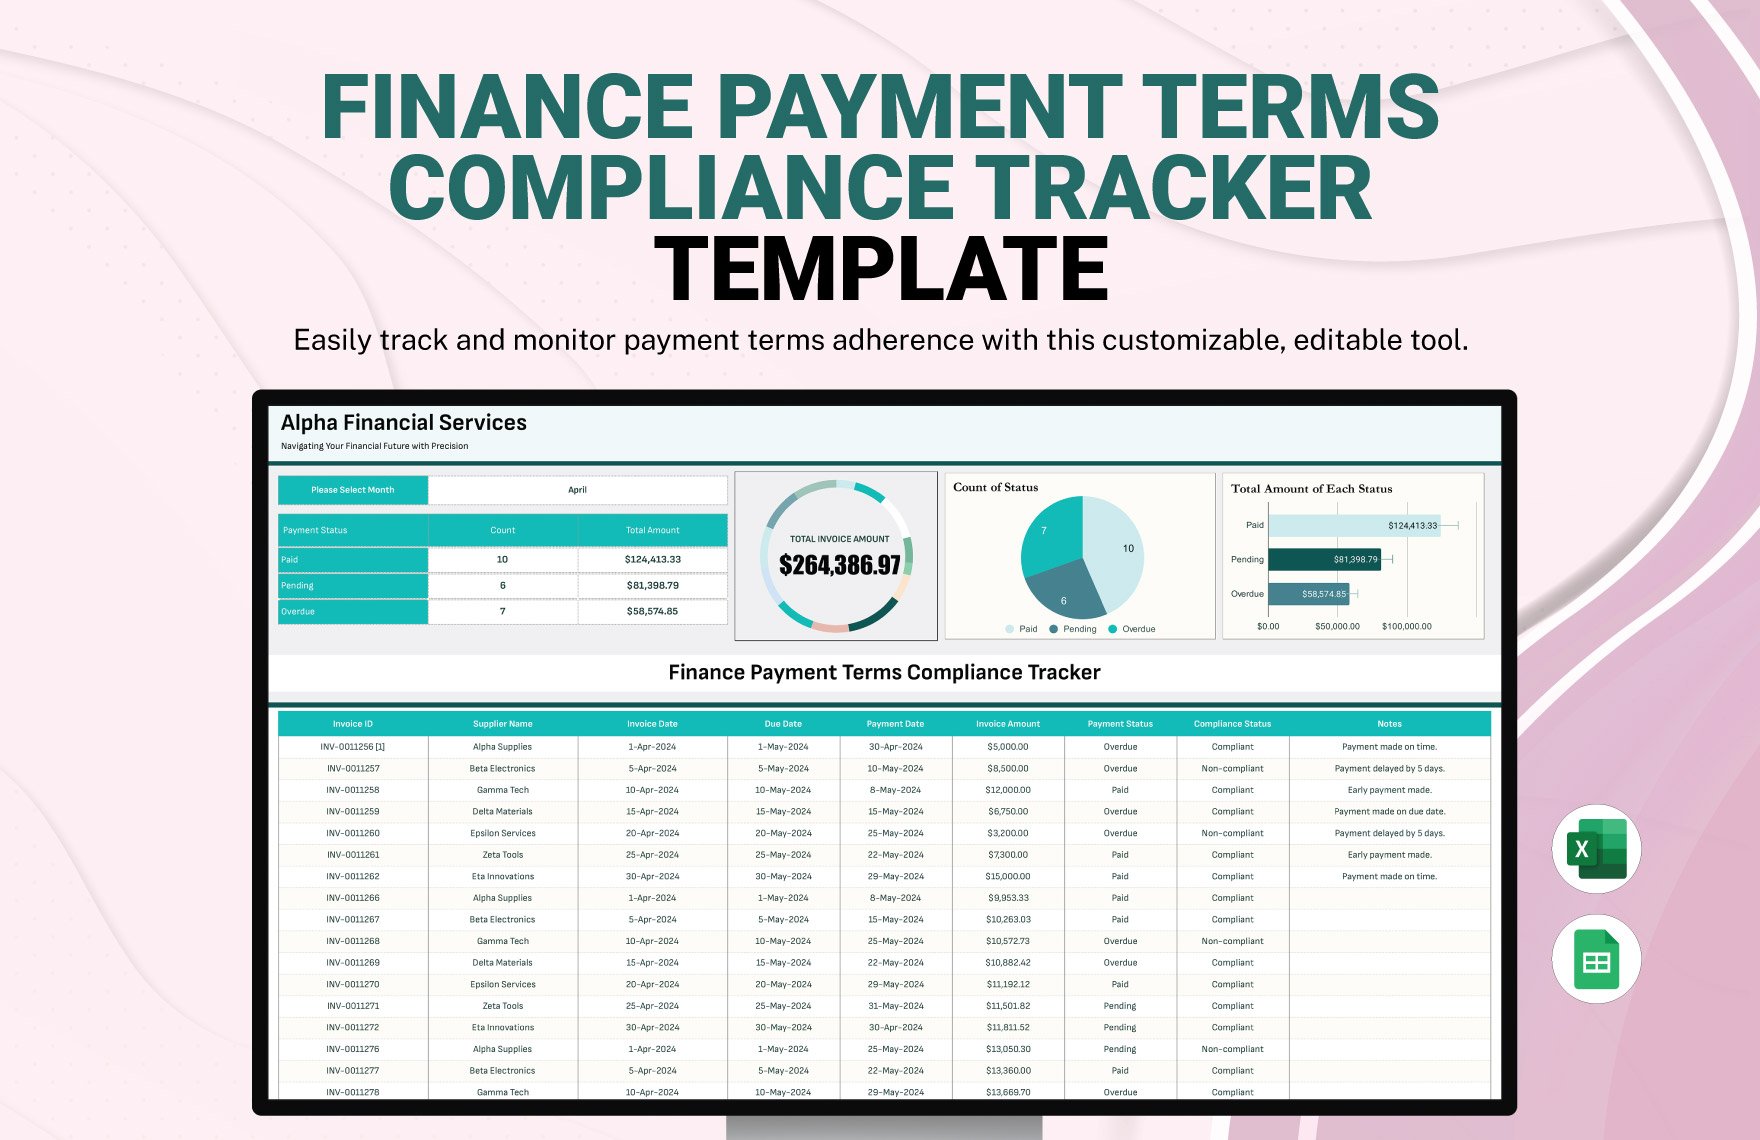 Finance Payment Terms Compliance Tracker Template